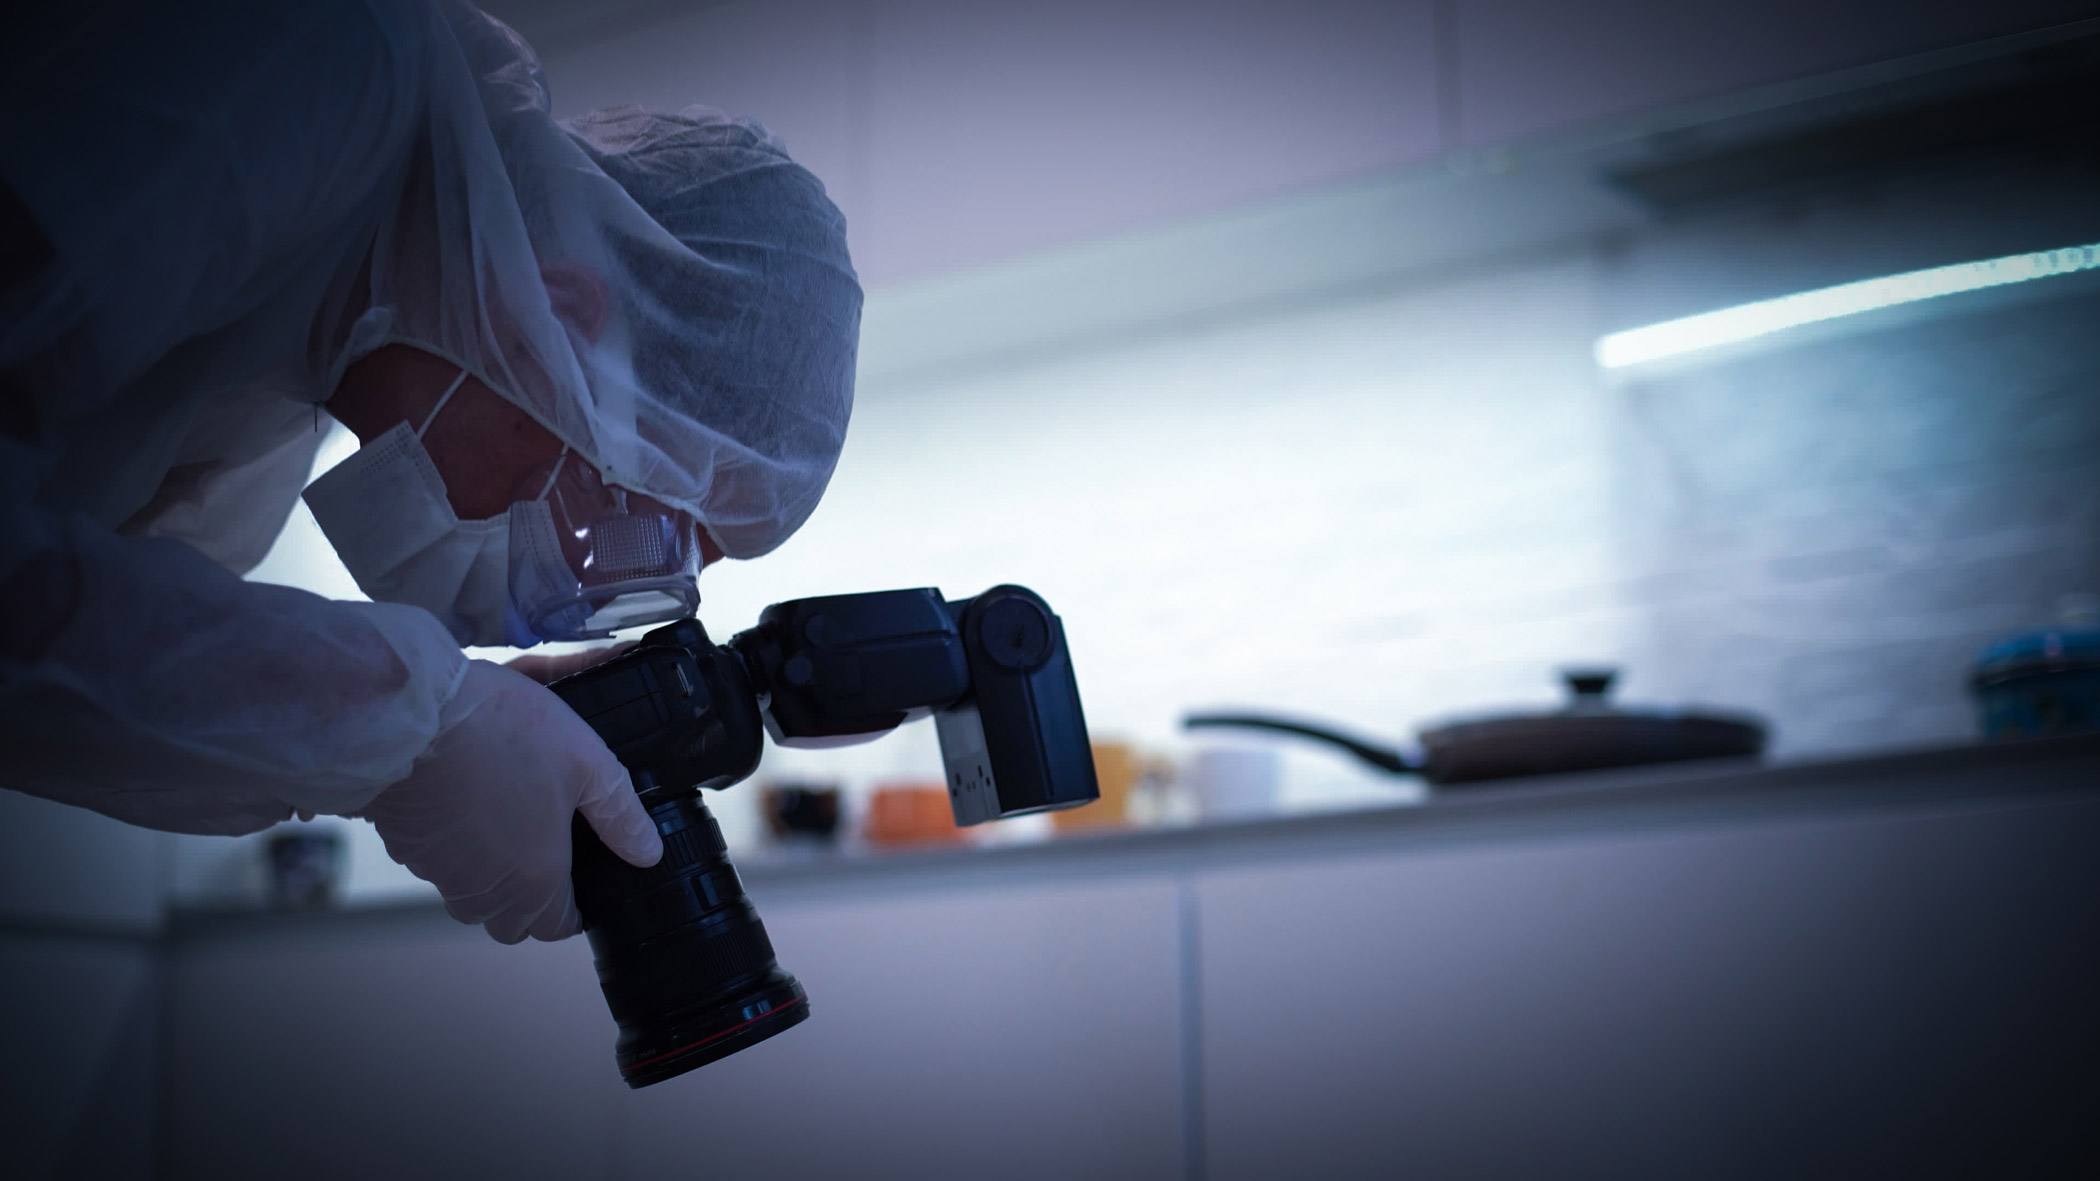 A person forensically investigates a surface with a camera